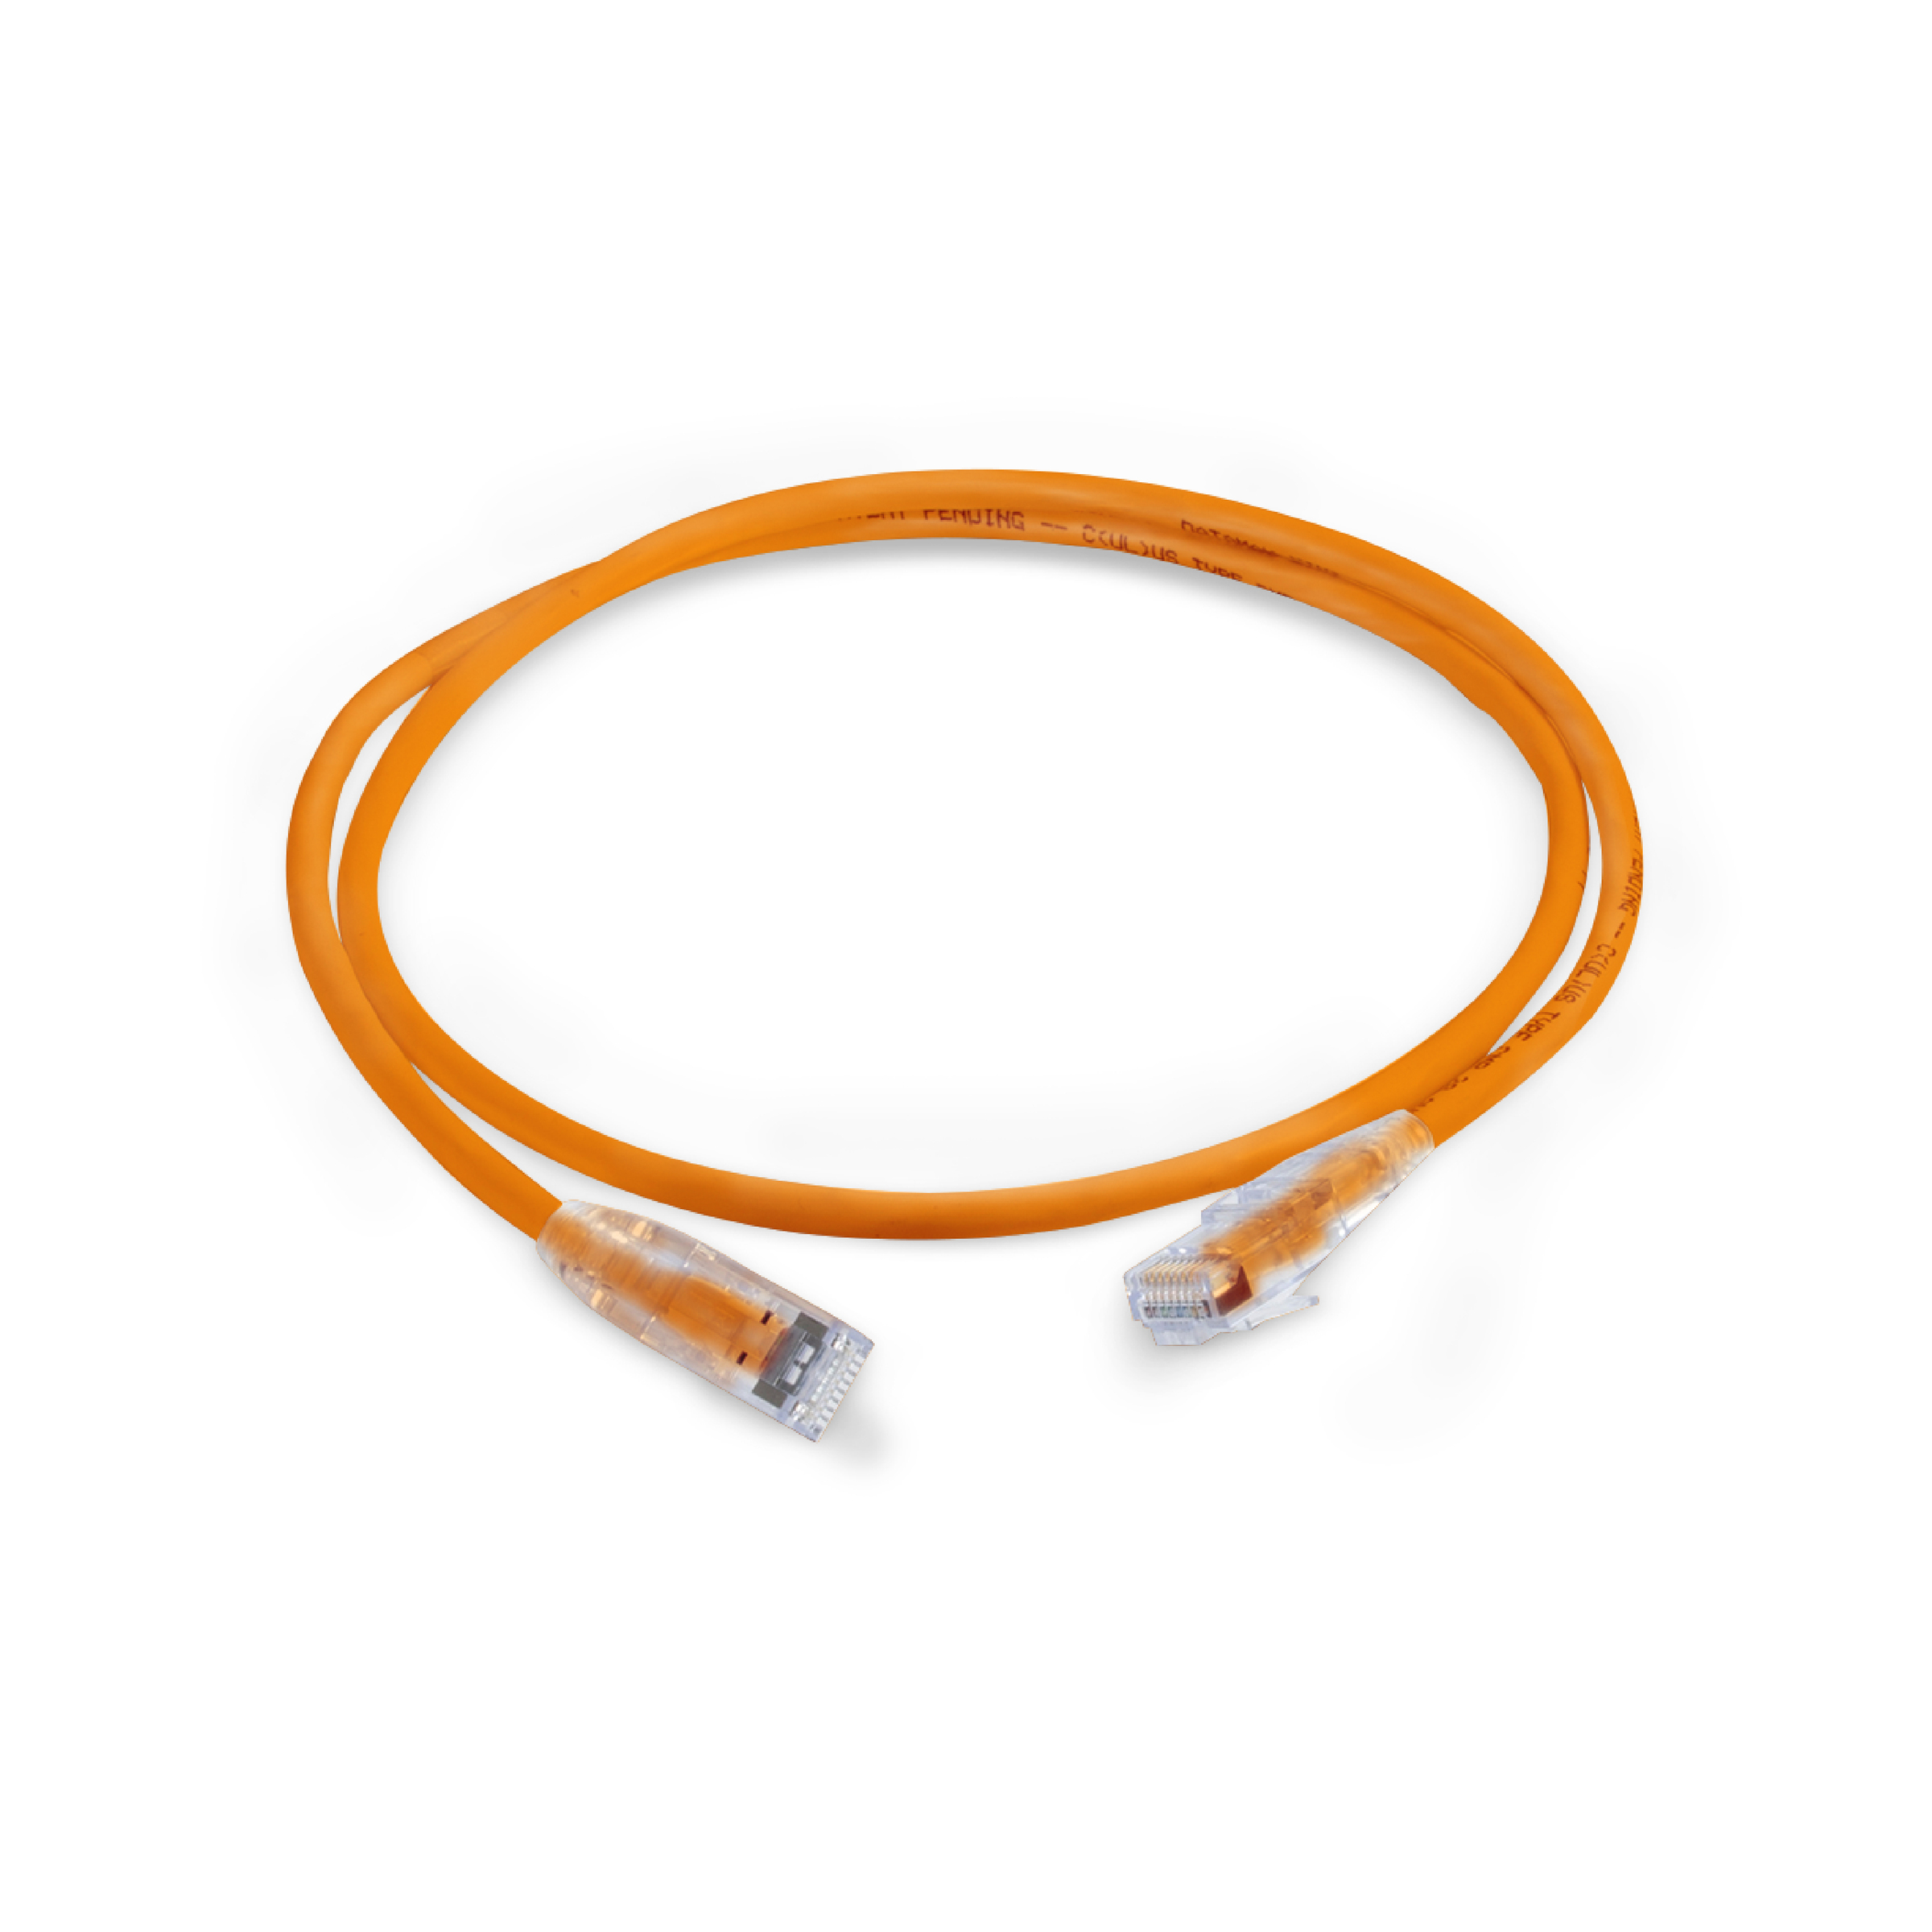 Structured Cabling Solution_Cable Boots_Patchcord Cable_Orange.jpg